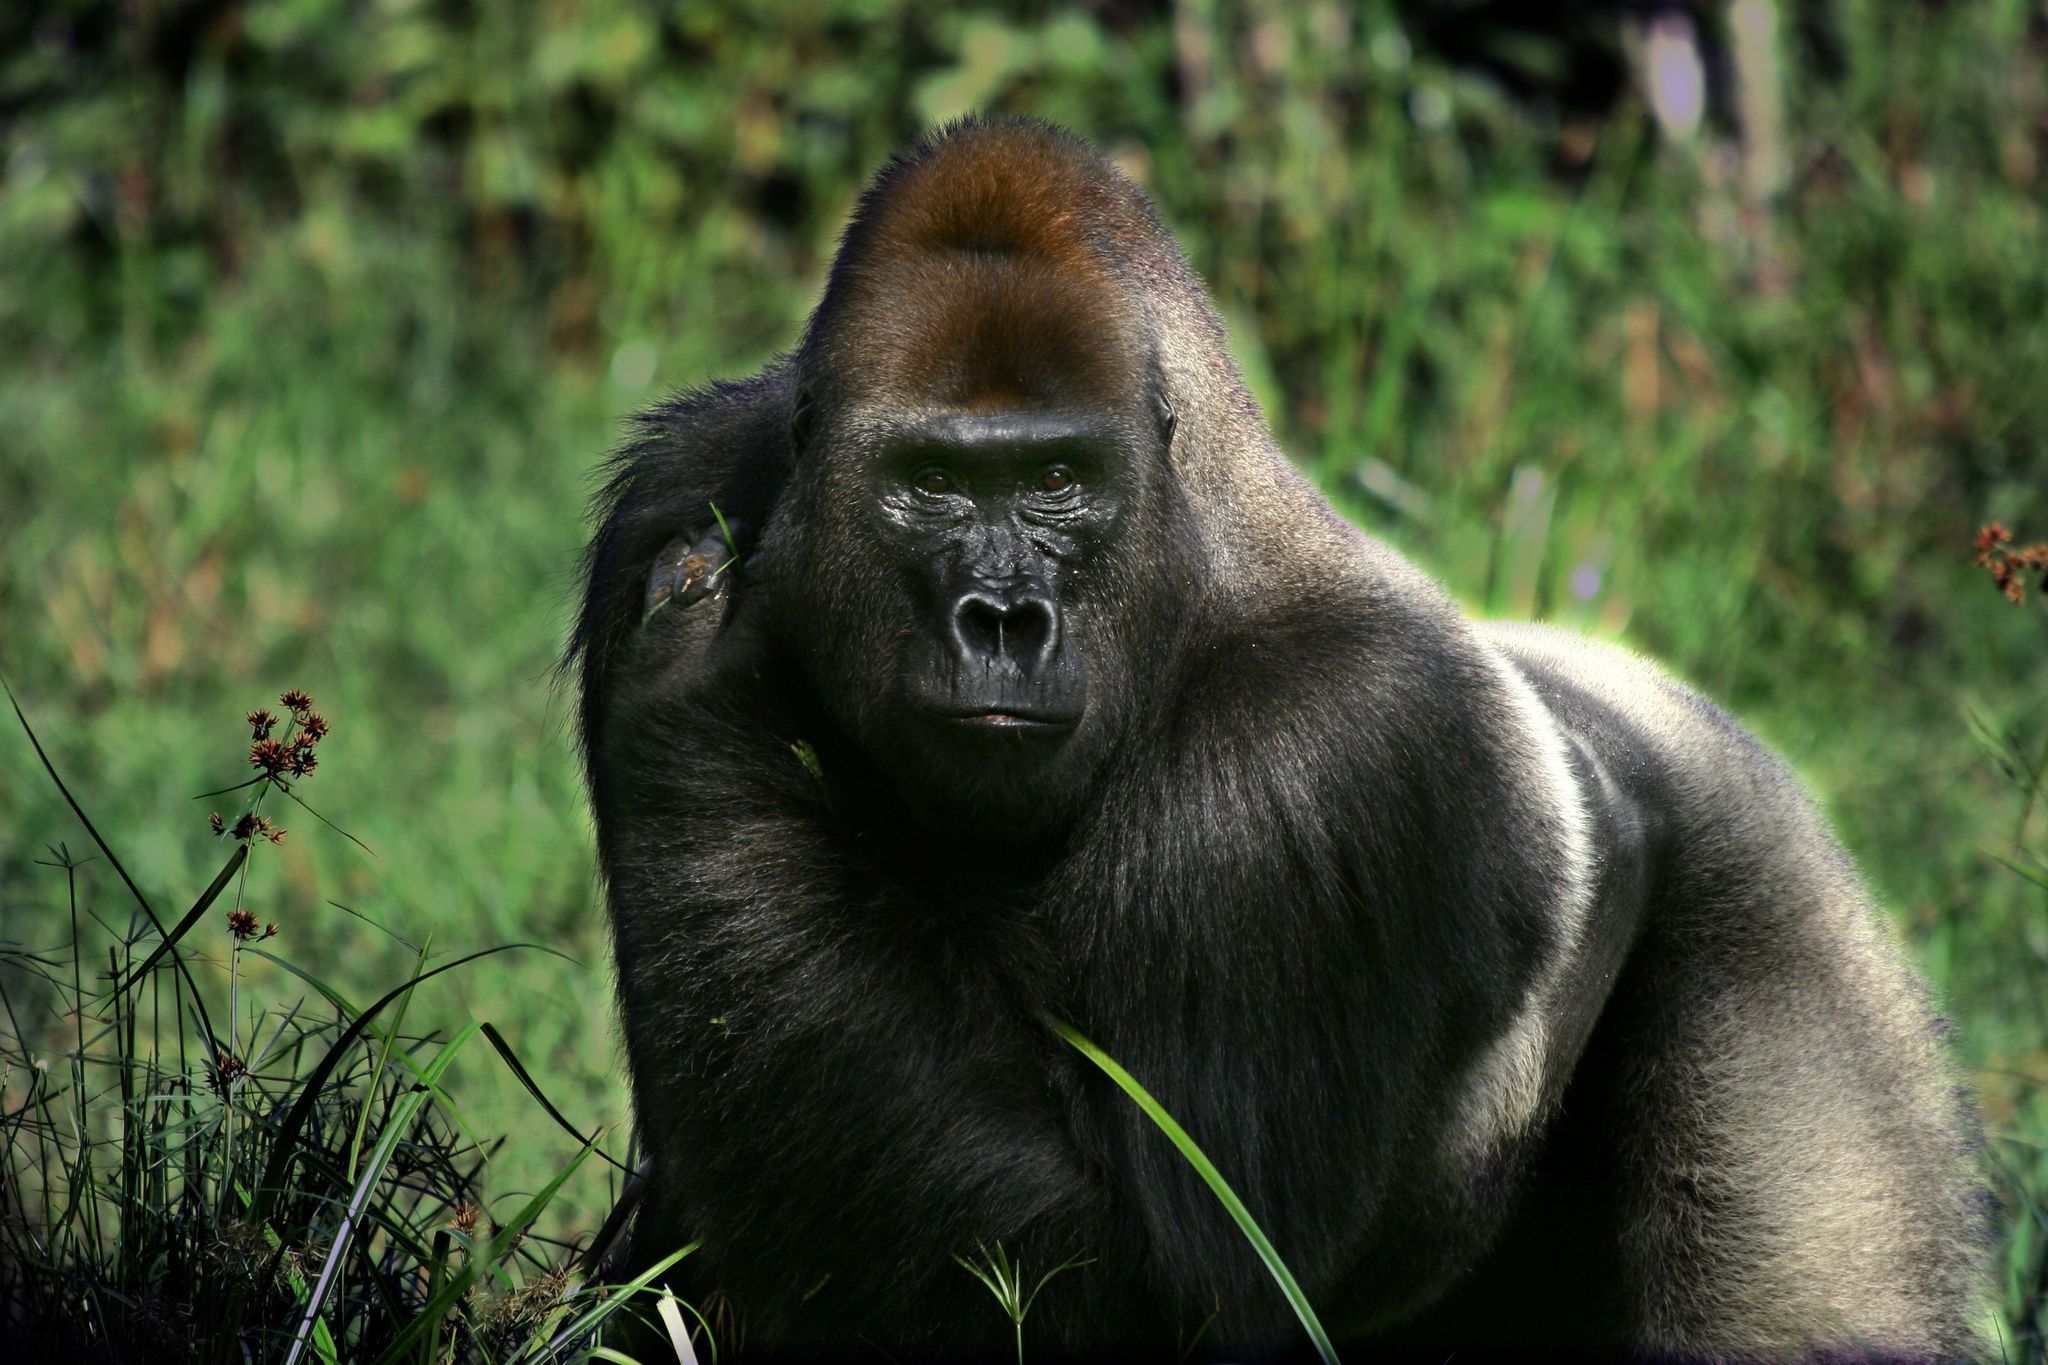 What is the lifespan of a gorilla?